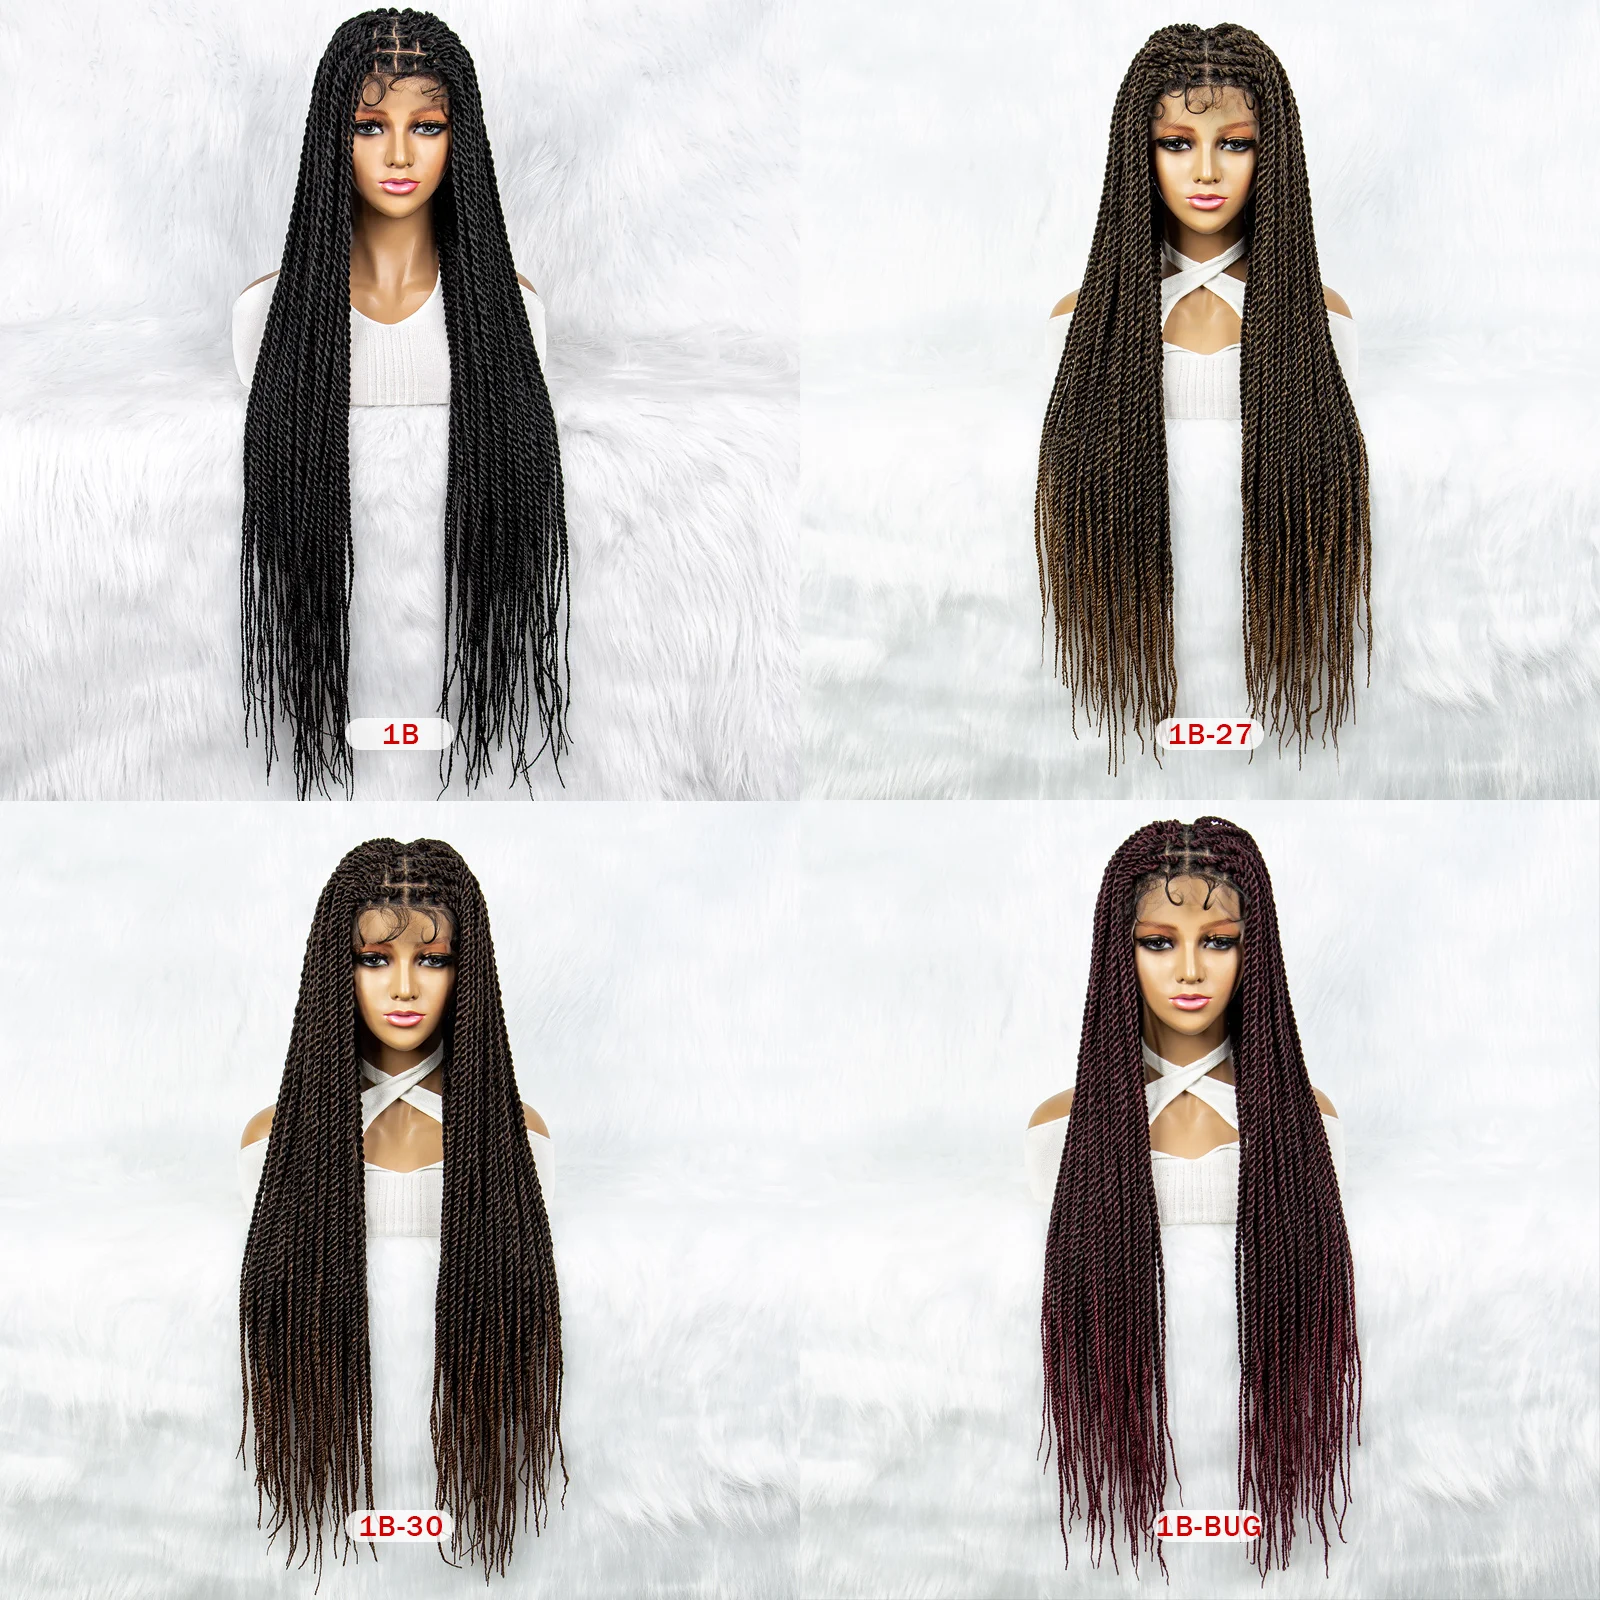 Full Lace Knotless Box Braided Wigs Knotless Cornrow Braids with Baby Hair Synthetic Lace Front Wigs Handmade Braided Wigs